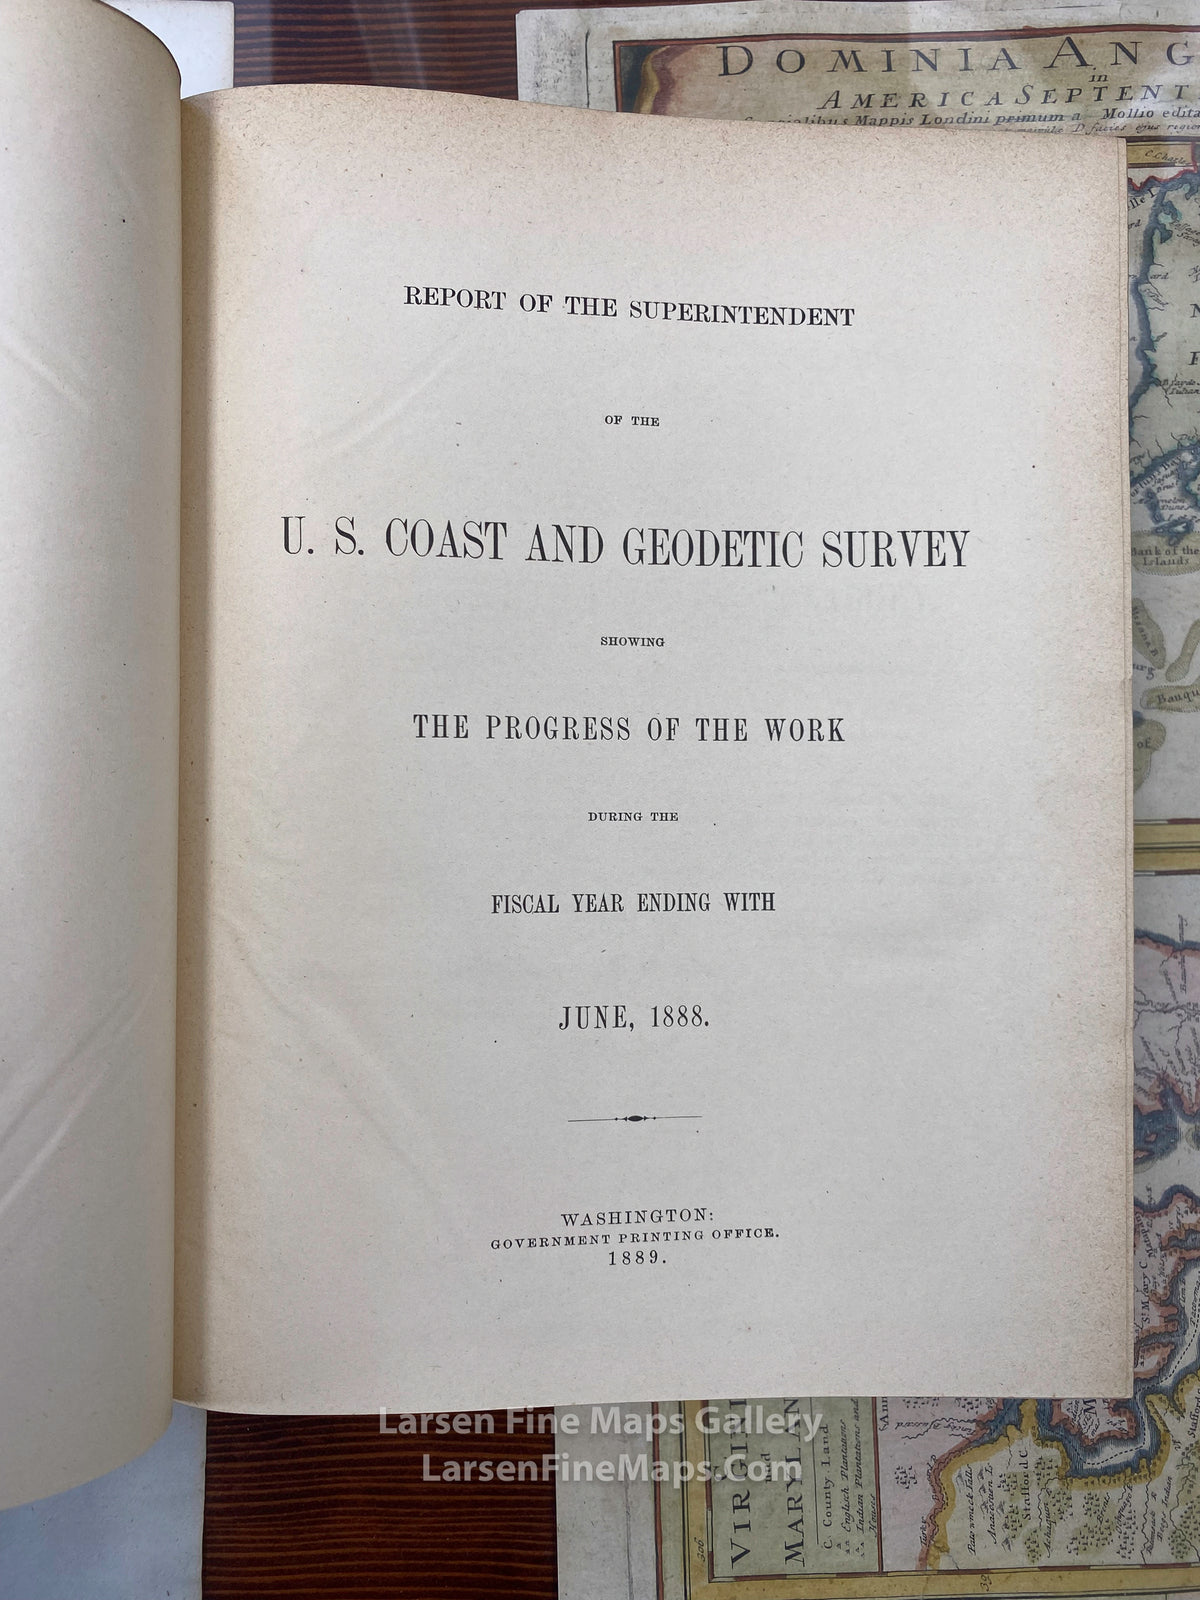 Report of The Superintendent of the U.S. Coast and Geodetic Survey Showing The Progress of The Work During The Fiscal Year Ending With June, 1888